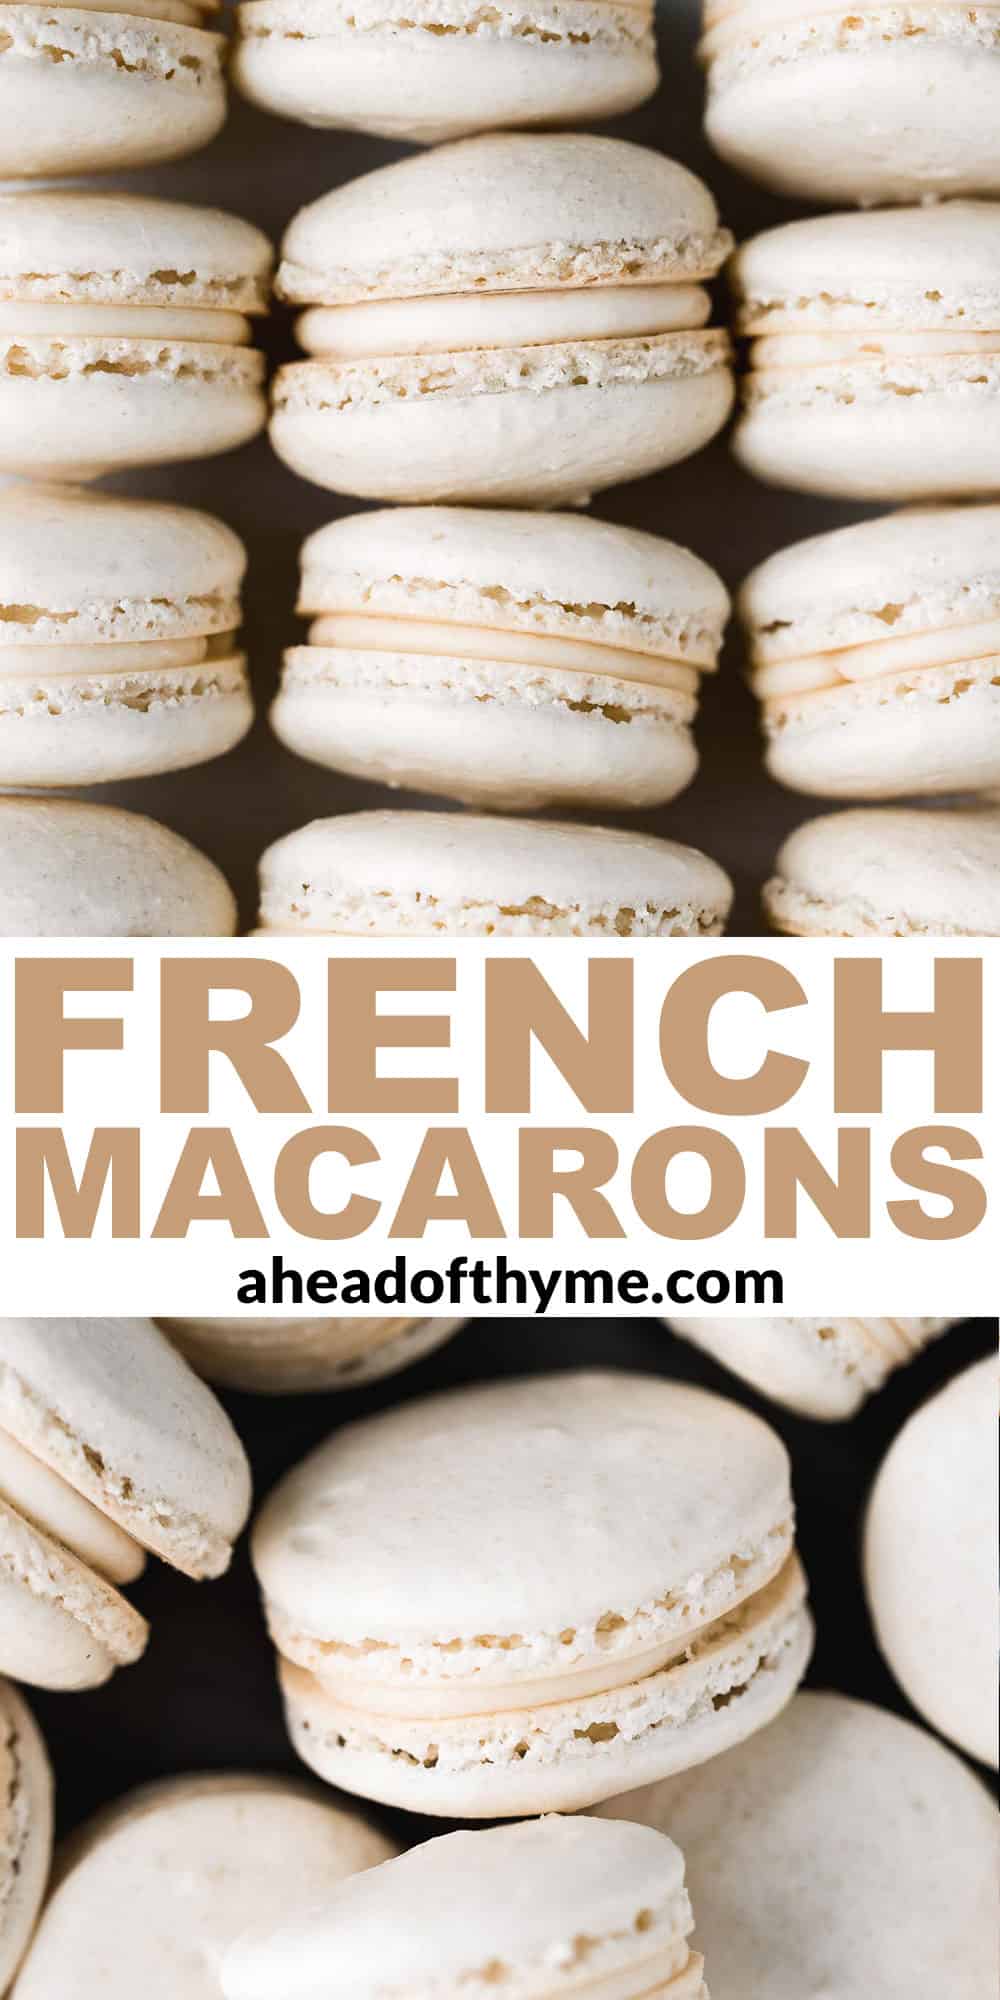 French Macarons with Vanilla Buttercream Filling